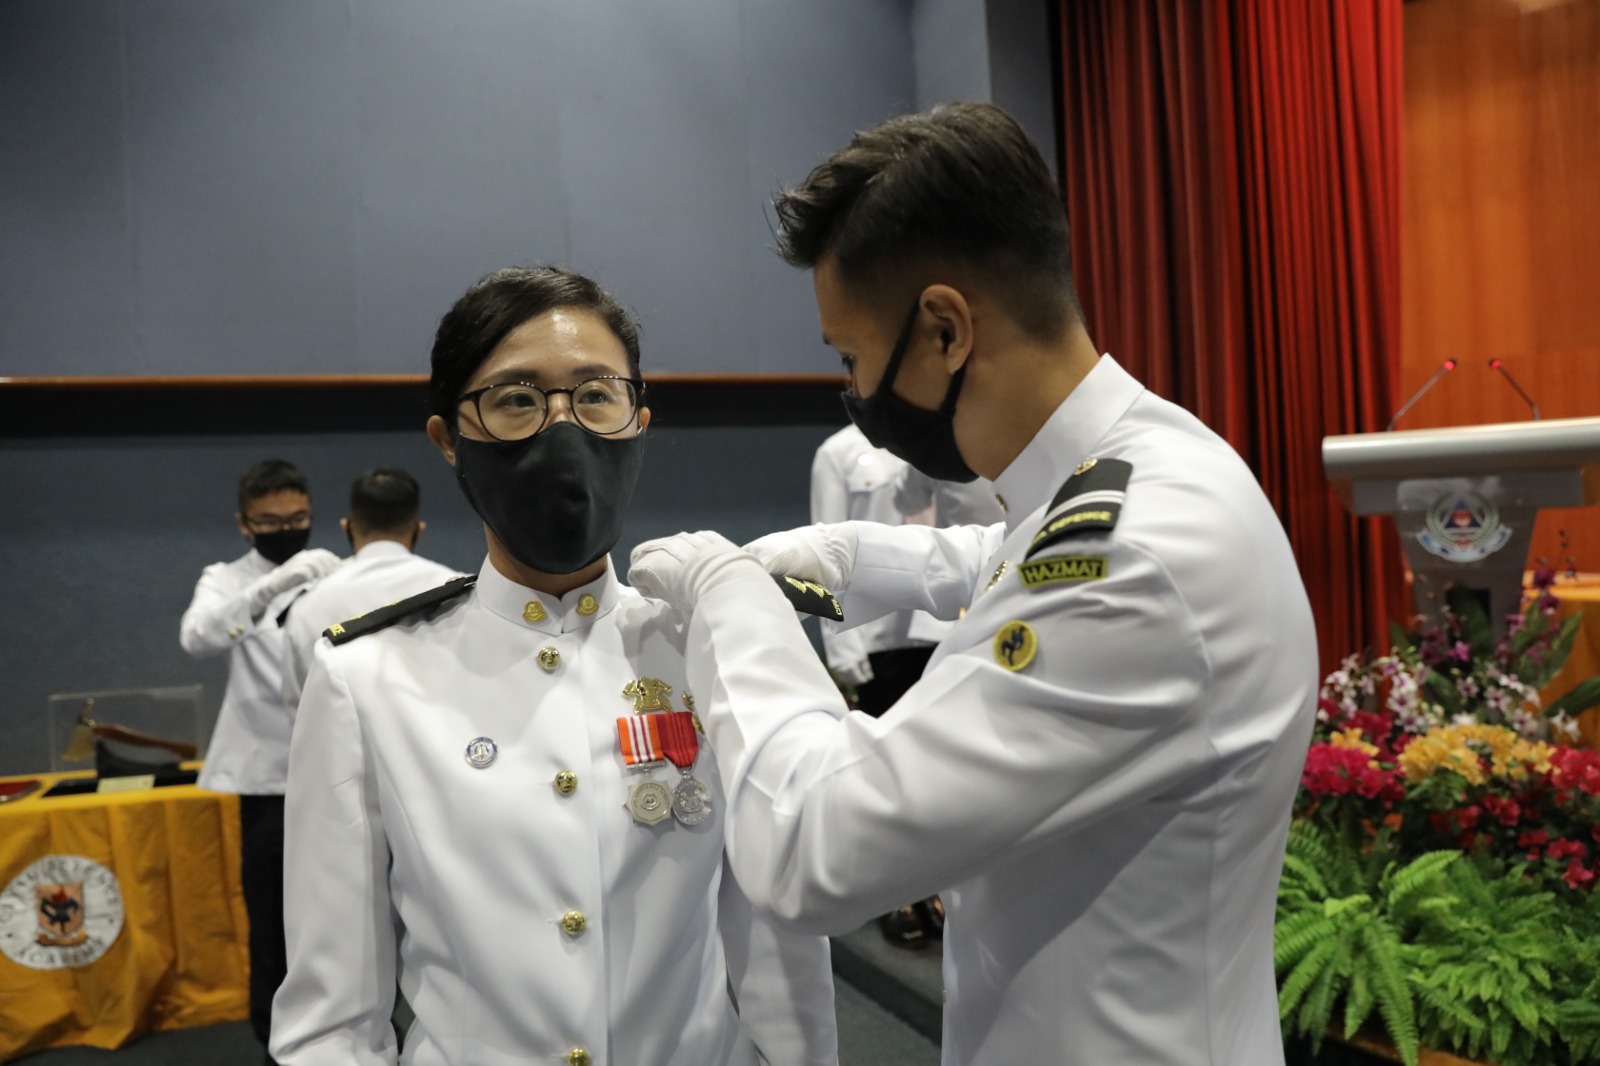 LTA Janice Lee receiving her new rank at the RCC closing ceremony in June 2020.